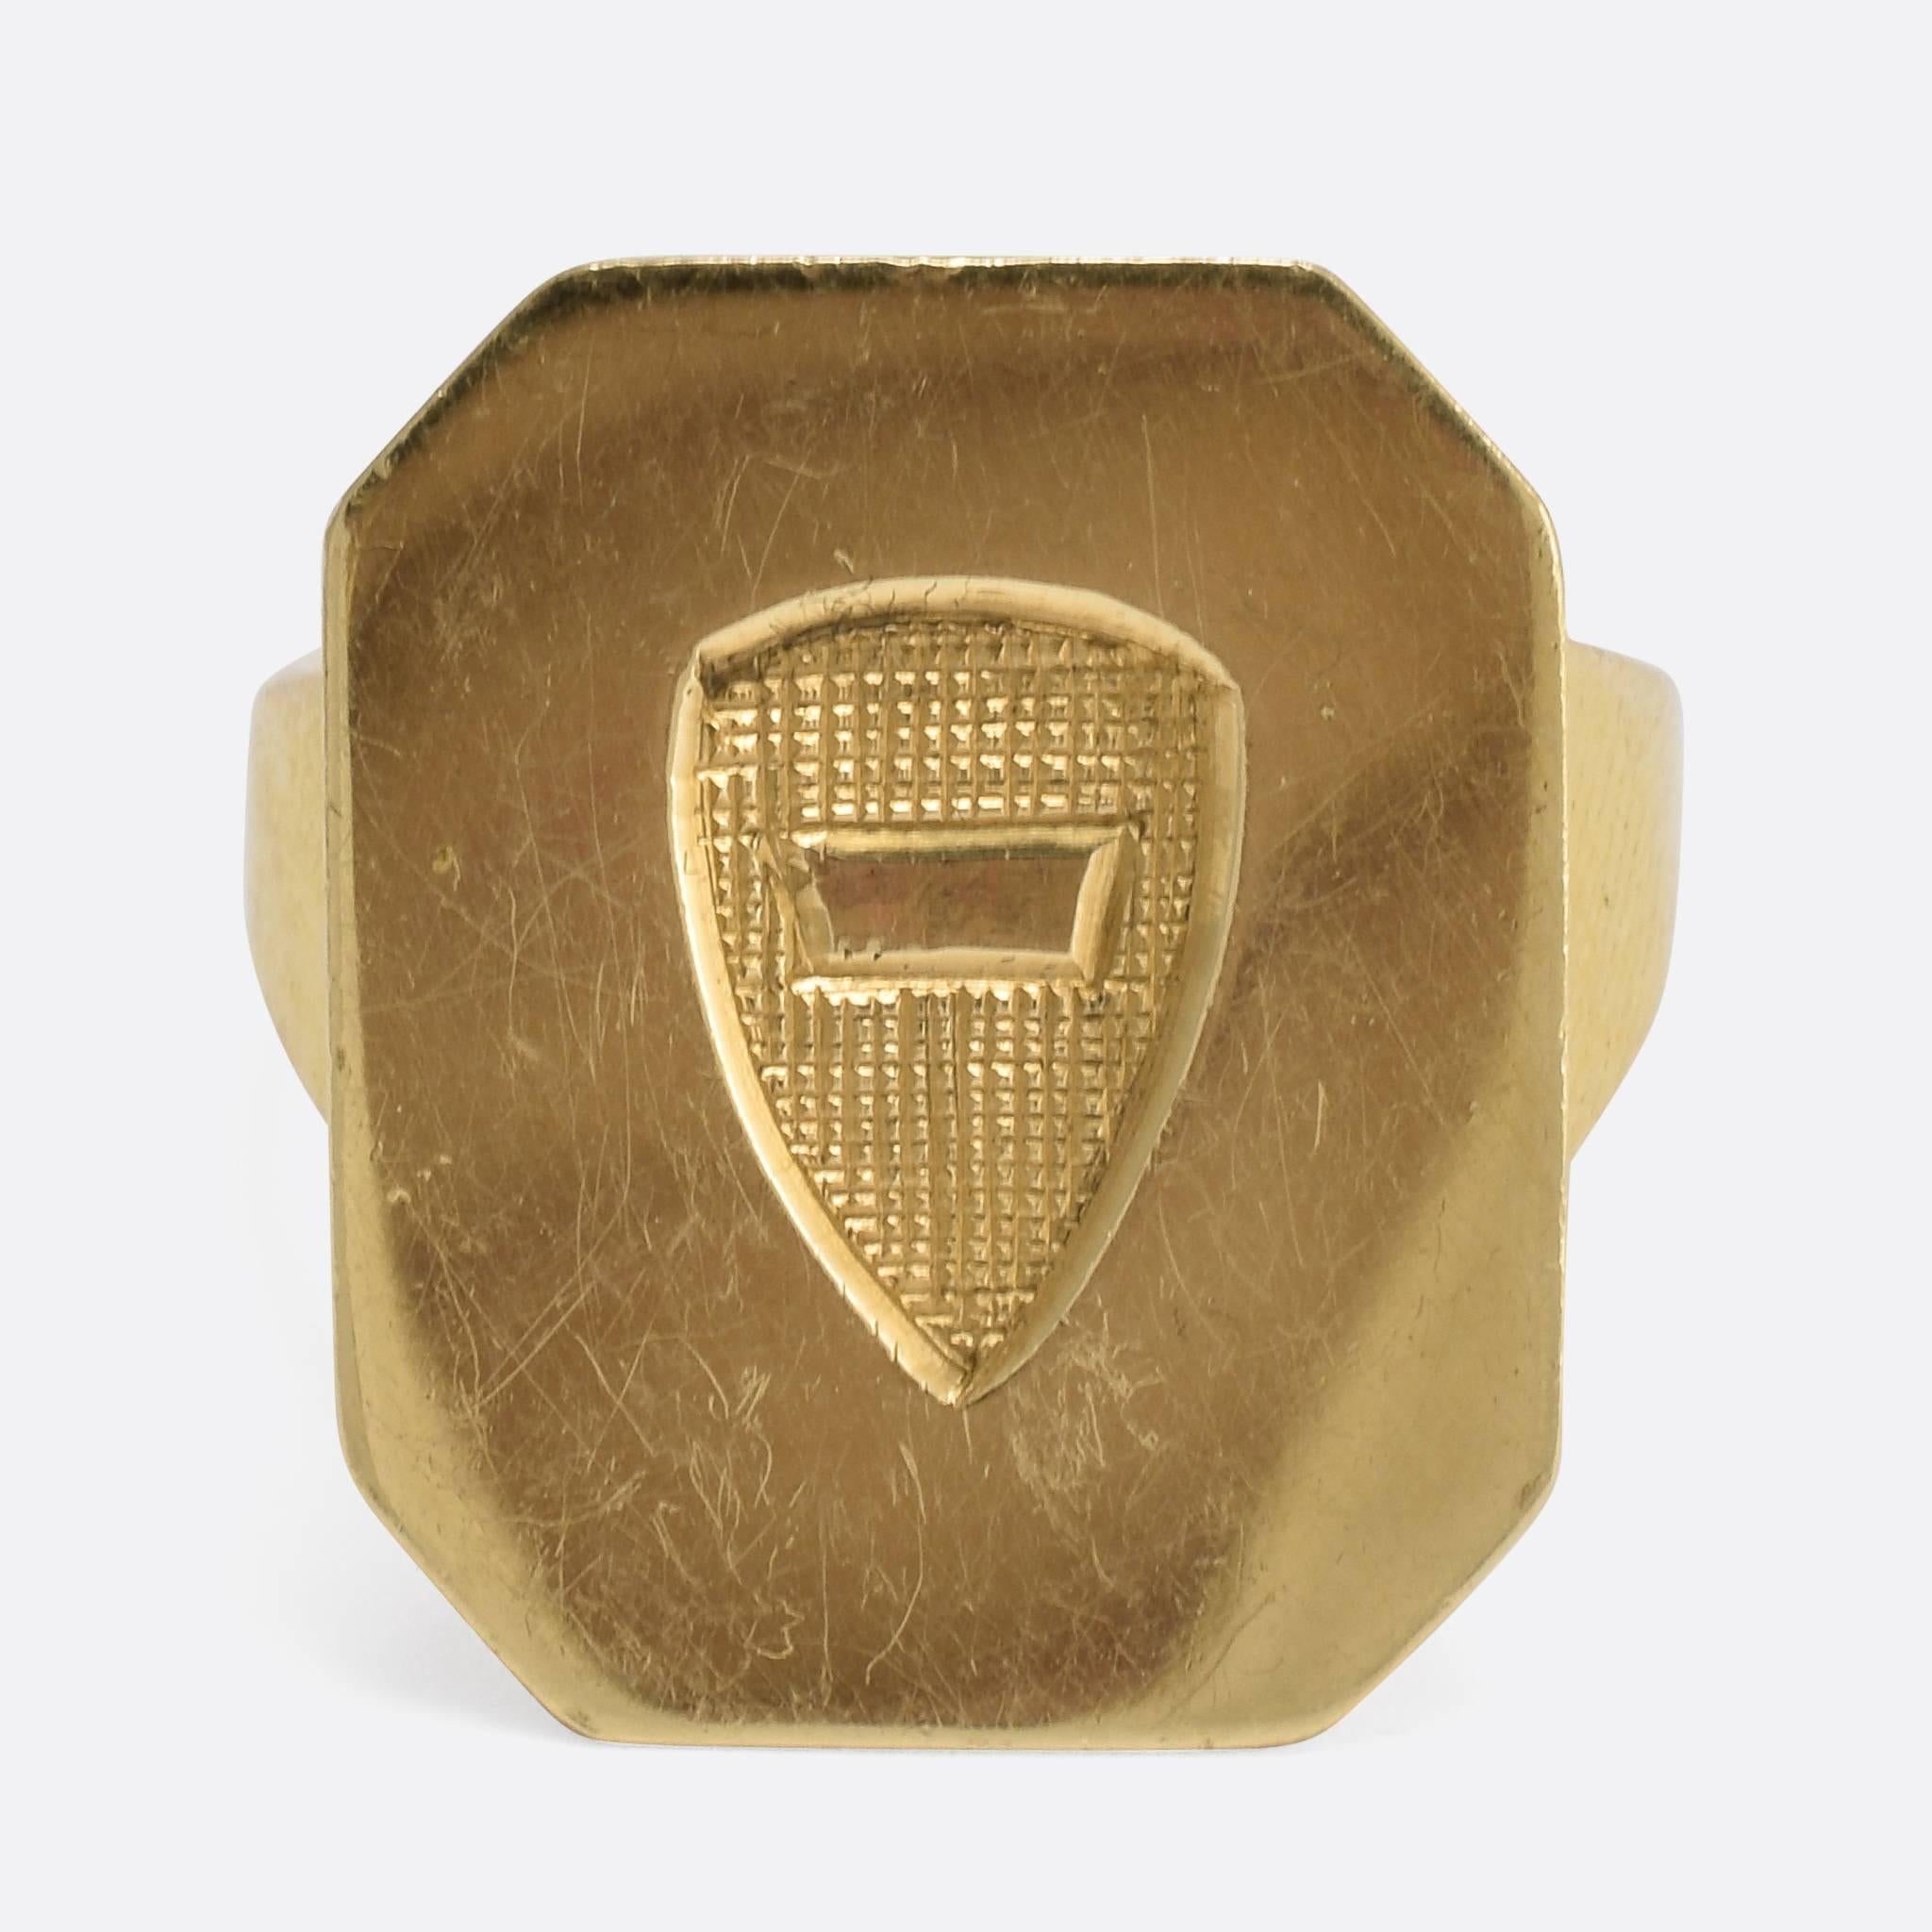 A stunning (and BIG) late Victorian signet ring, of unusual minimalist design. The octagonal face bears a cool intaglio shield with great textured detail (I think the plain slit in the middle is for a monogram engraving...). It's modelled in 18k